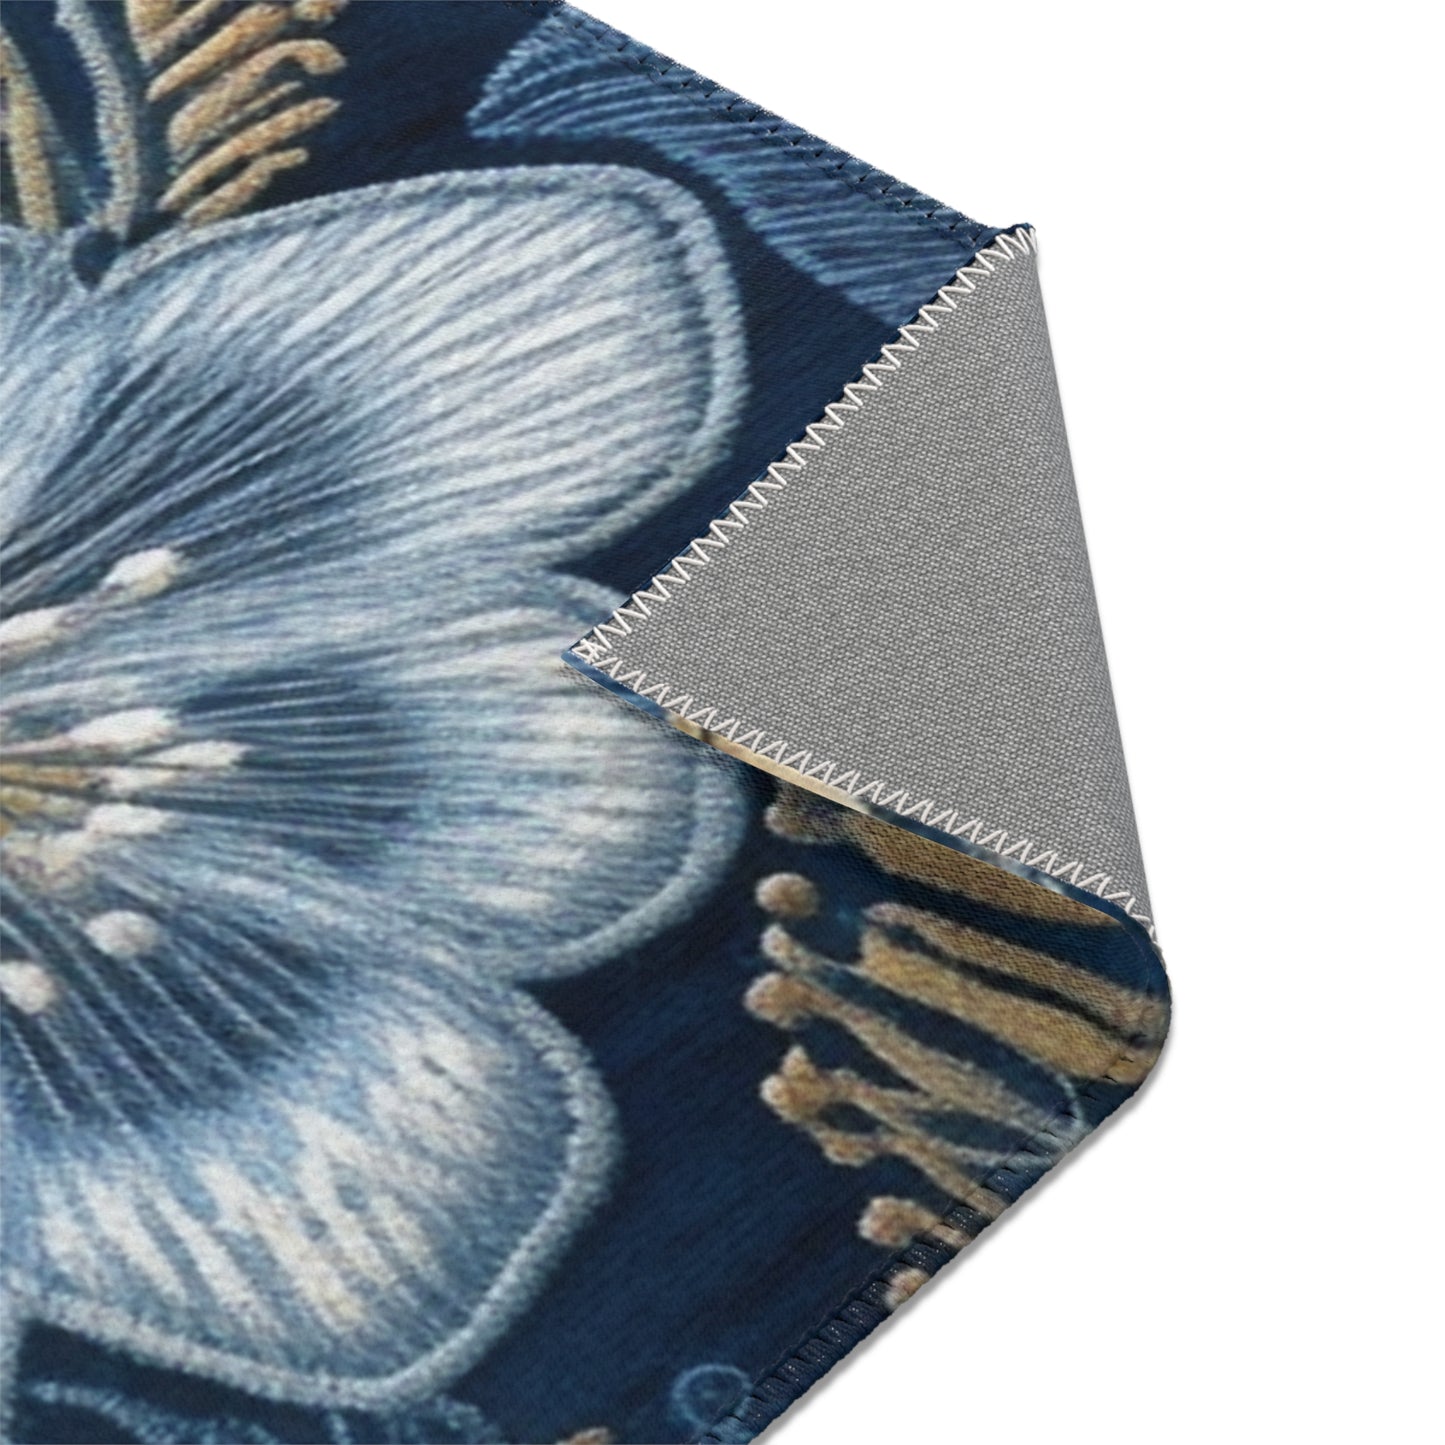 Flower Blossom Embroidery Floral on Denim Style - Area Rugs